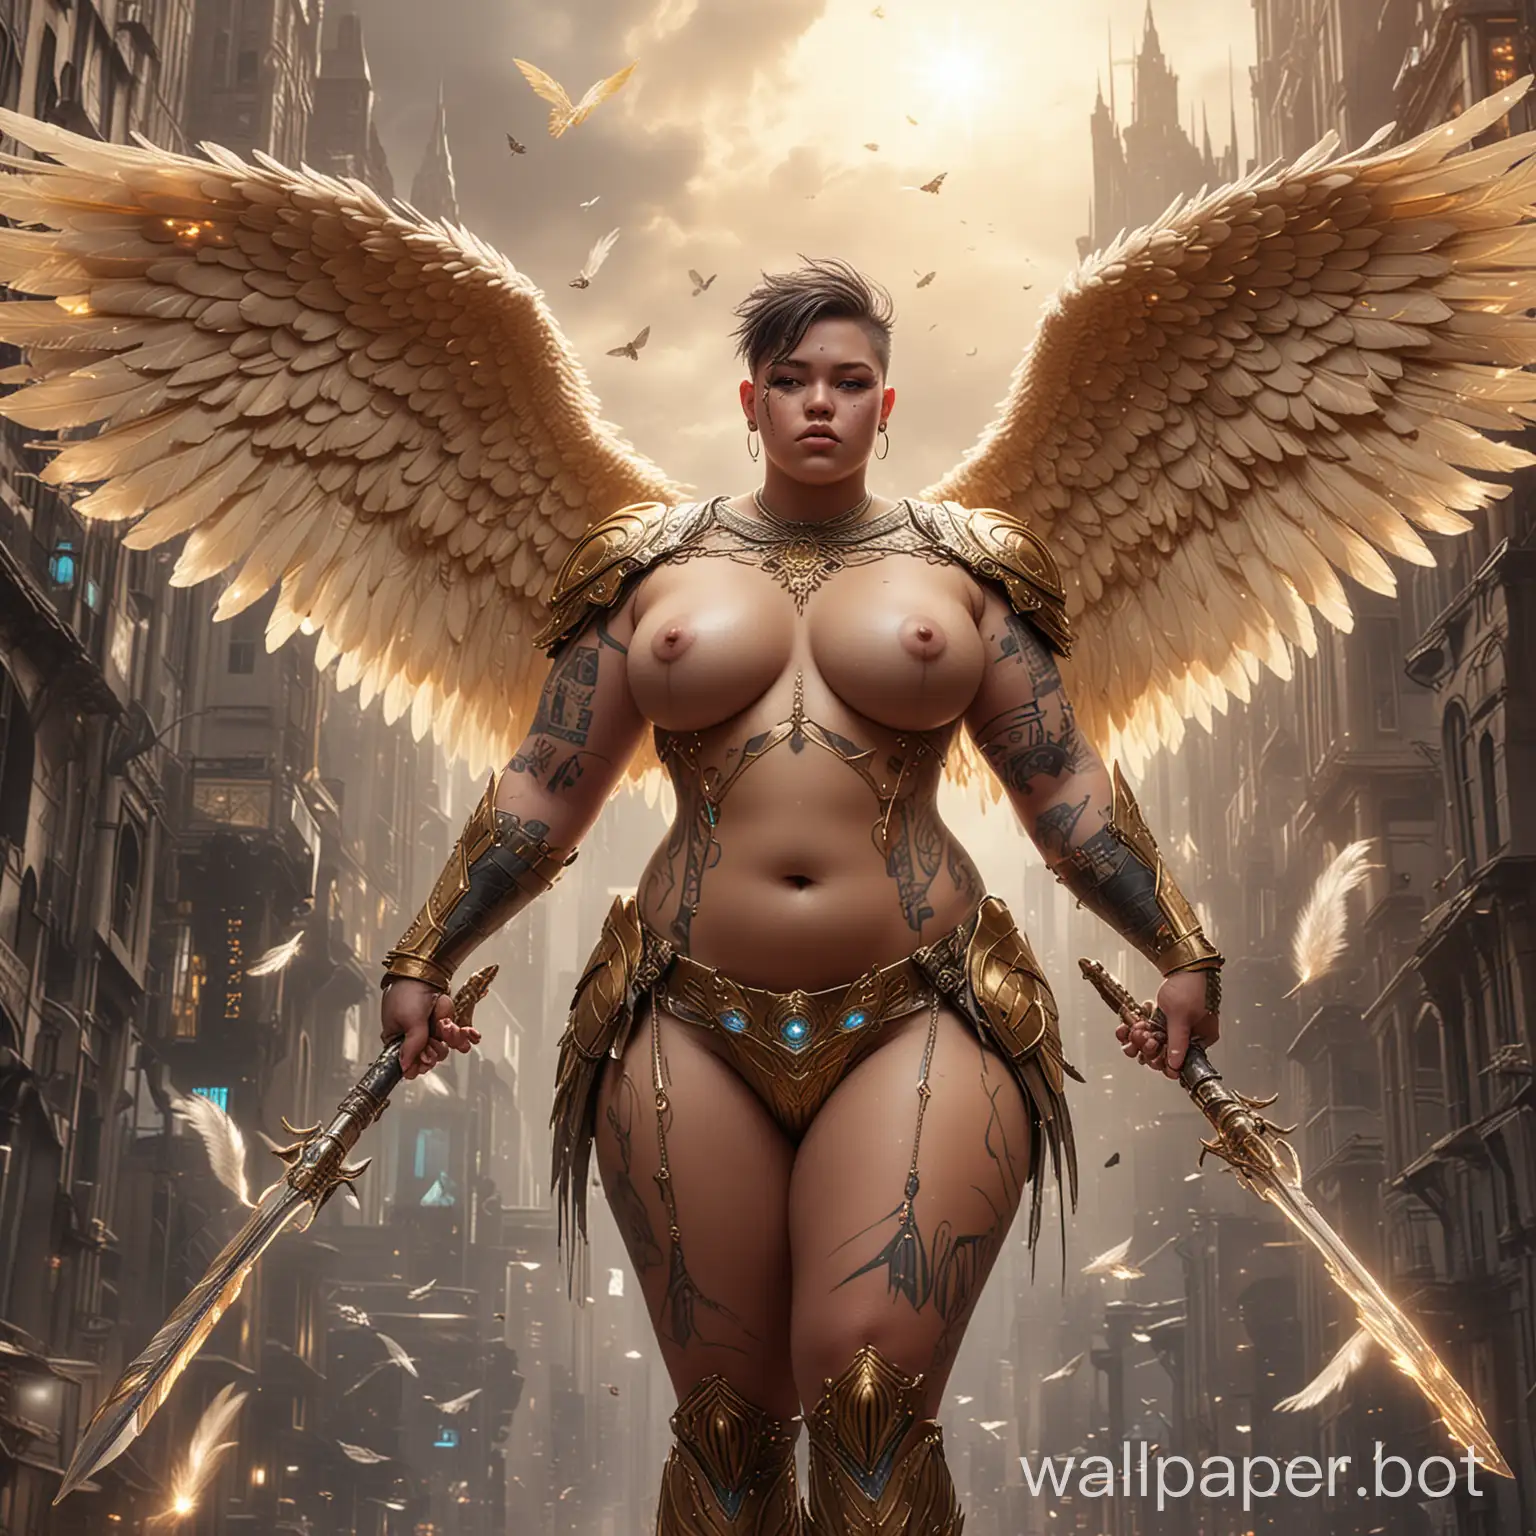 A sci-fi future fat tattooed warrior angel boy with strong arms and exposed chubby breasts with pierced nipples and chubby belly, wearing minimal armor with iridescent wings with gold-tipped feathers, hovering in flight and glowing with angelic power while holding an aetheric magical staff, posing in front of a magical futuristic cityscape.